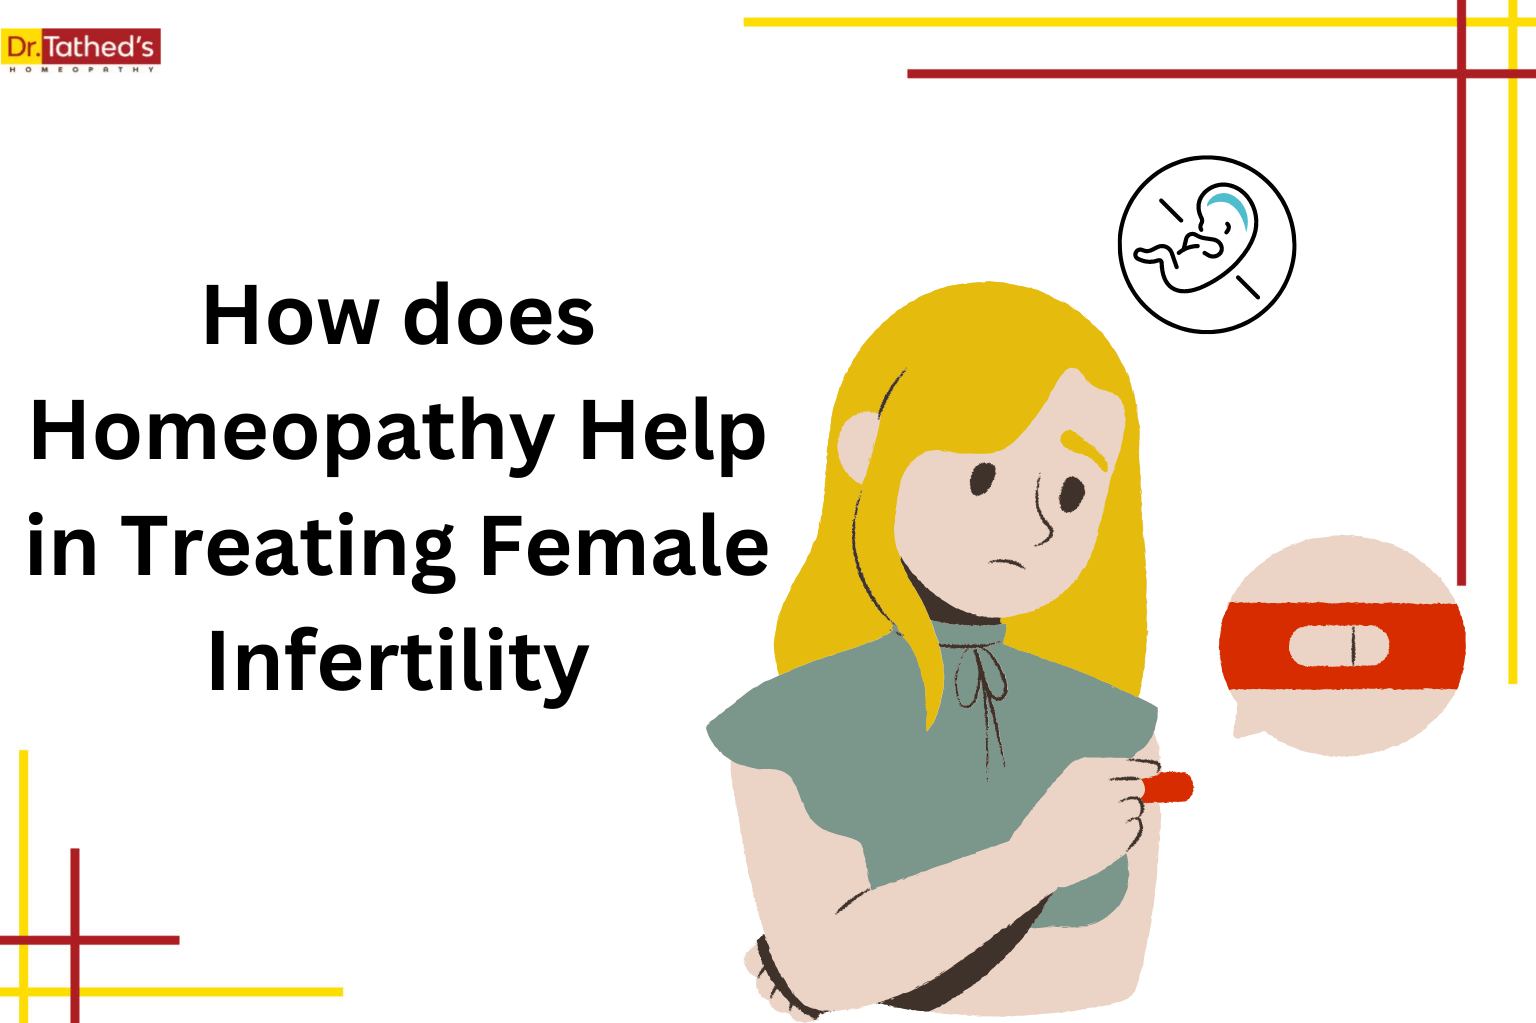 How does Homeopathy Help in Treating Female Infertility